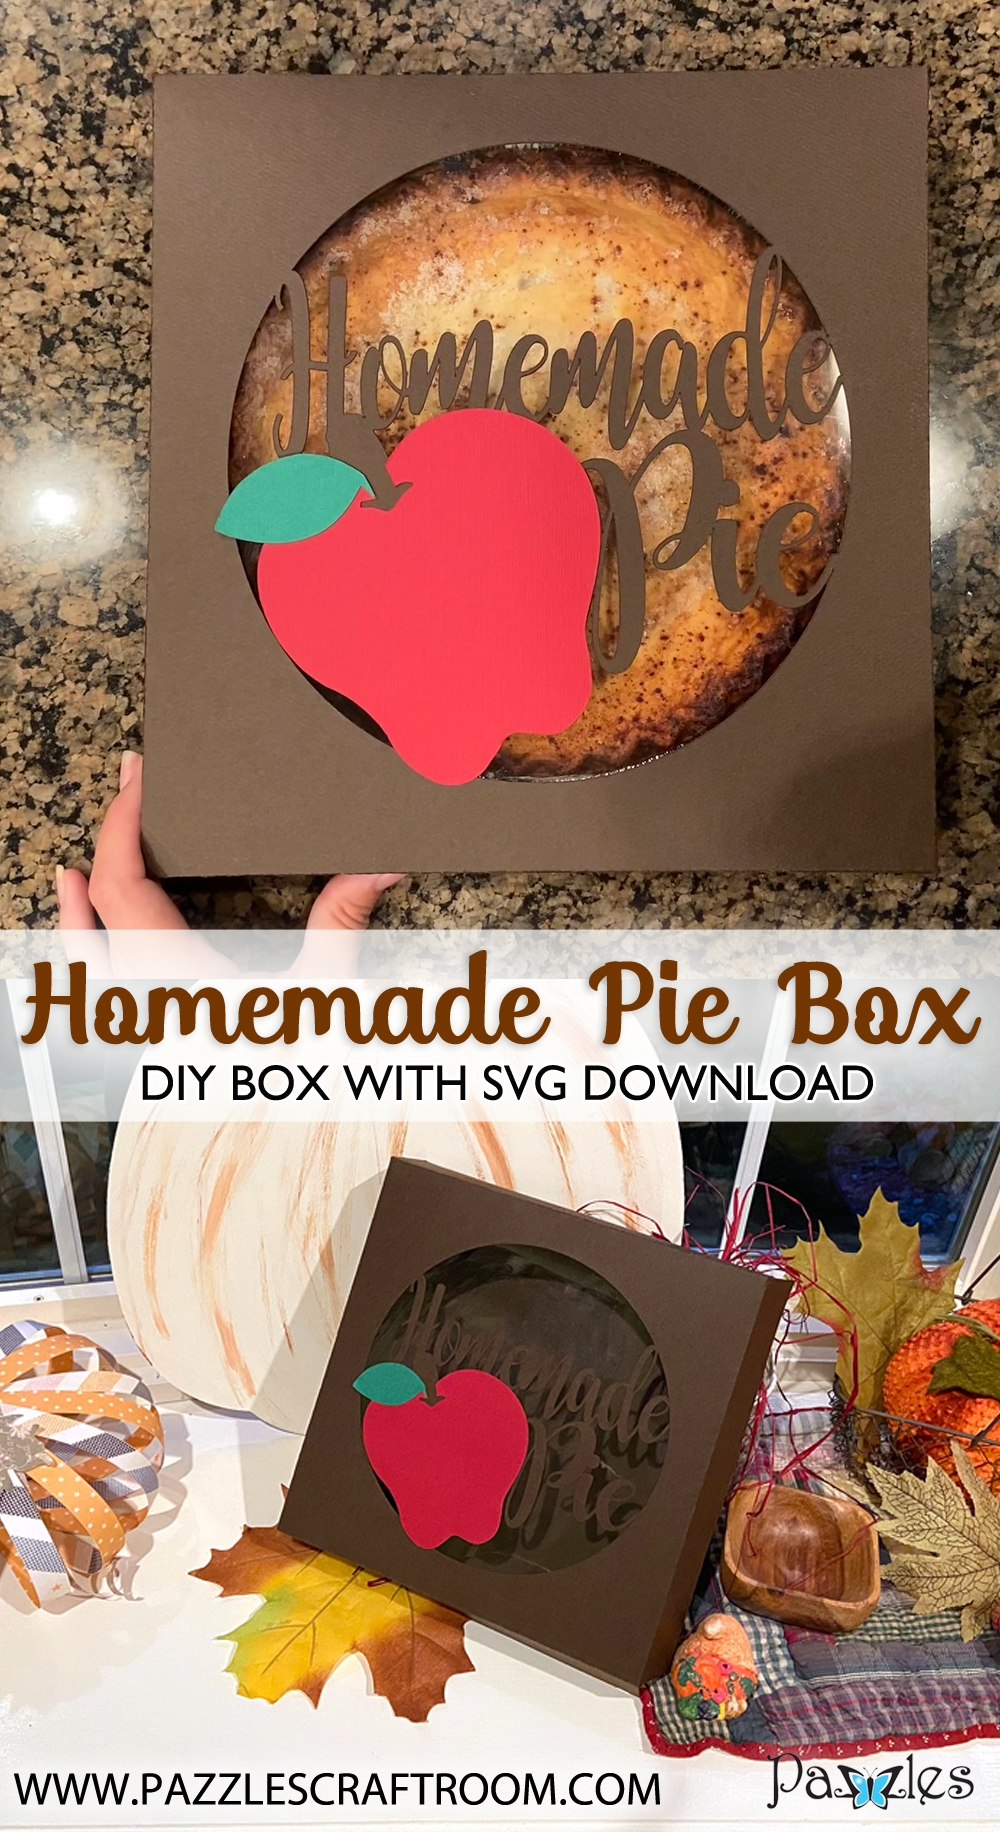 Pazzles DIY Homemade Pie Box with instant SVG download. Compatible with all major electronic cutters including Pazzles Inspiration, Cricut, and SIlhouette Cameo. Design by Sara Weber.